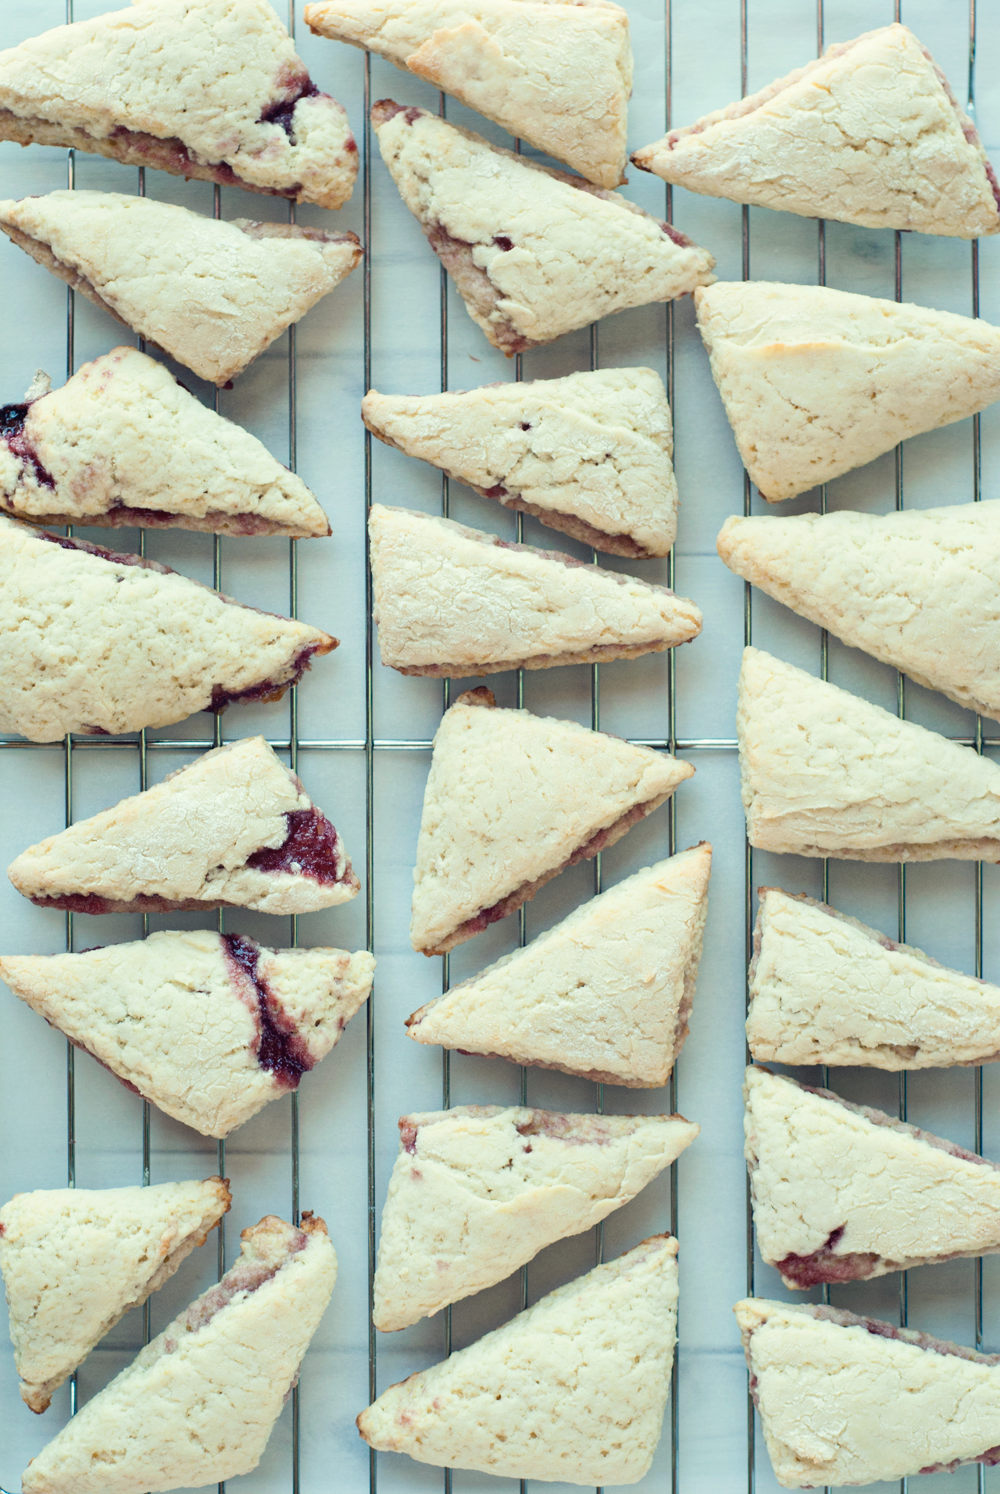 For breakfast, a snack, or high tea, these easy raspberry scones are exactly that: EASY! Did I mention, delicious too?